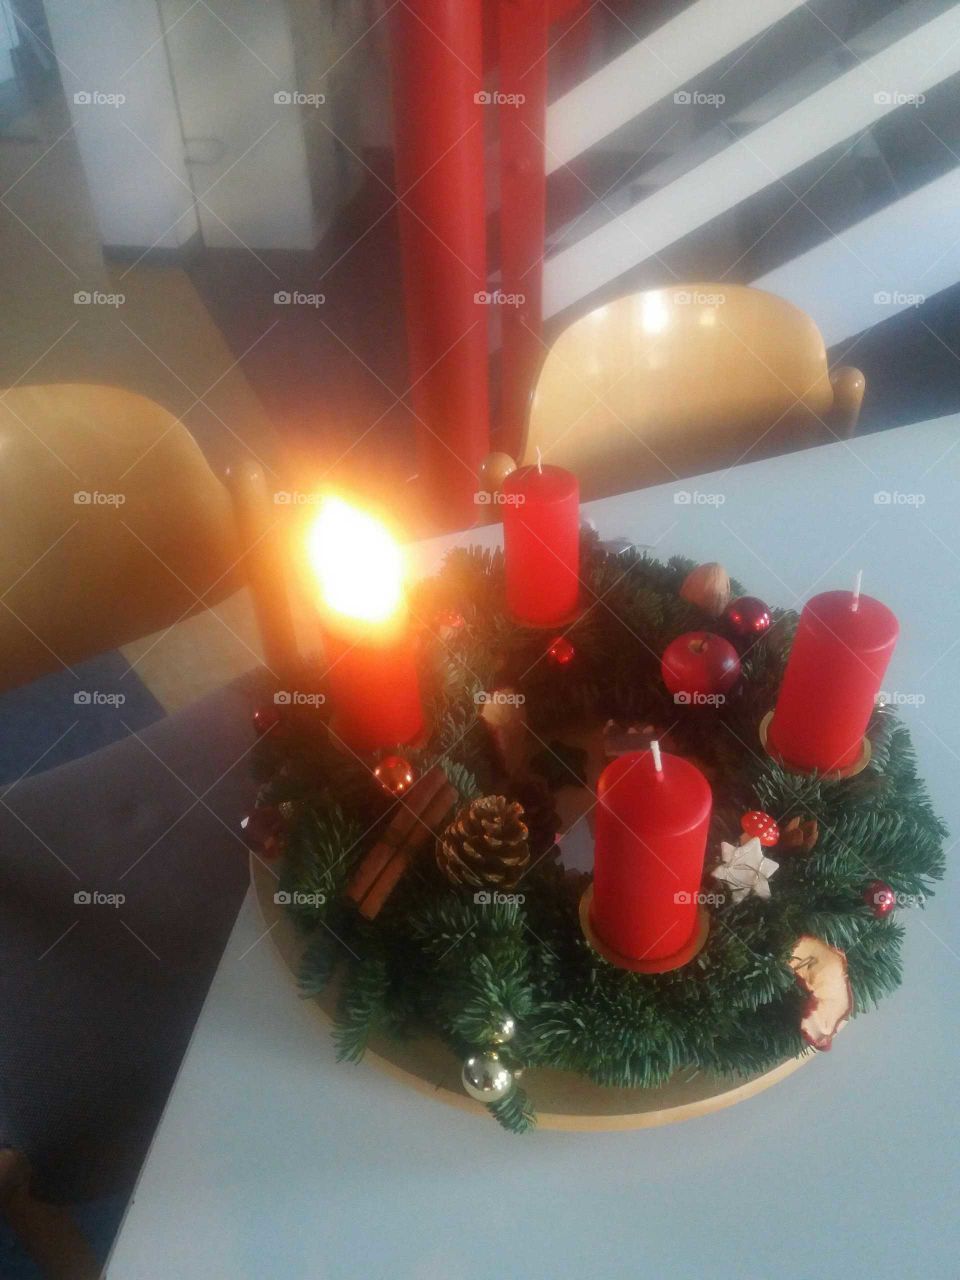 Advent Wreath with one burning candle